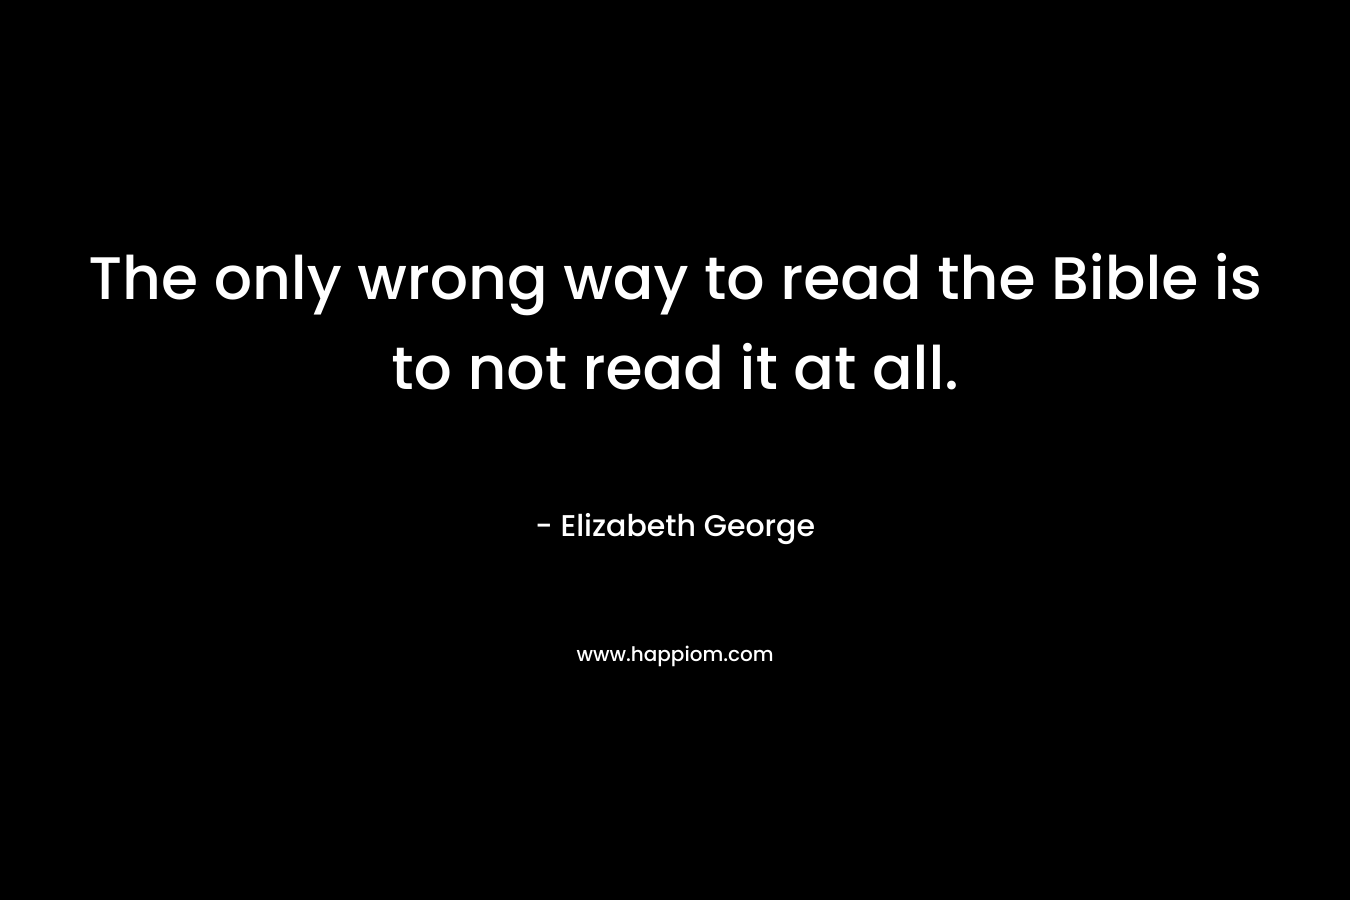 The only wrong way to read the Bible is to not read it at all.